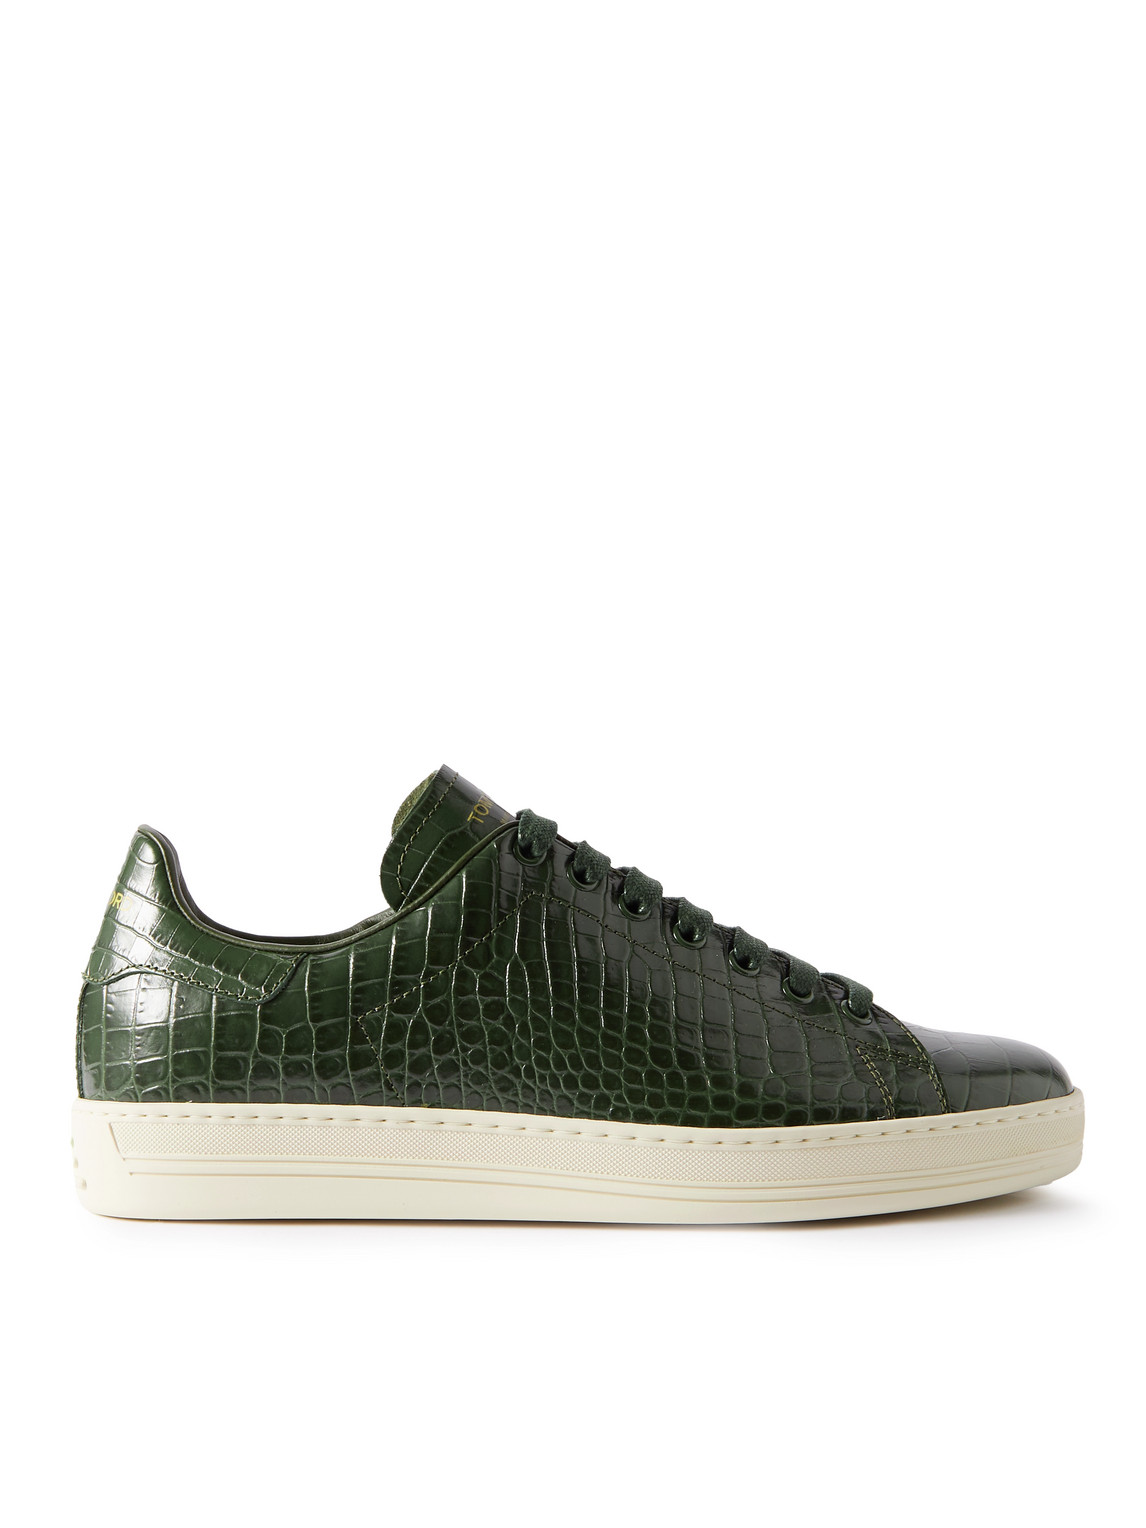 Tom Ford Warwick Croc-effect Patent-leather Sneakers In Green